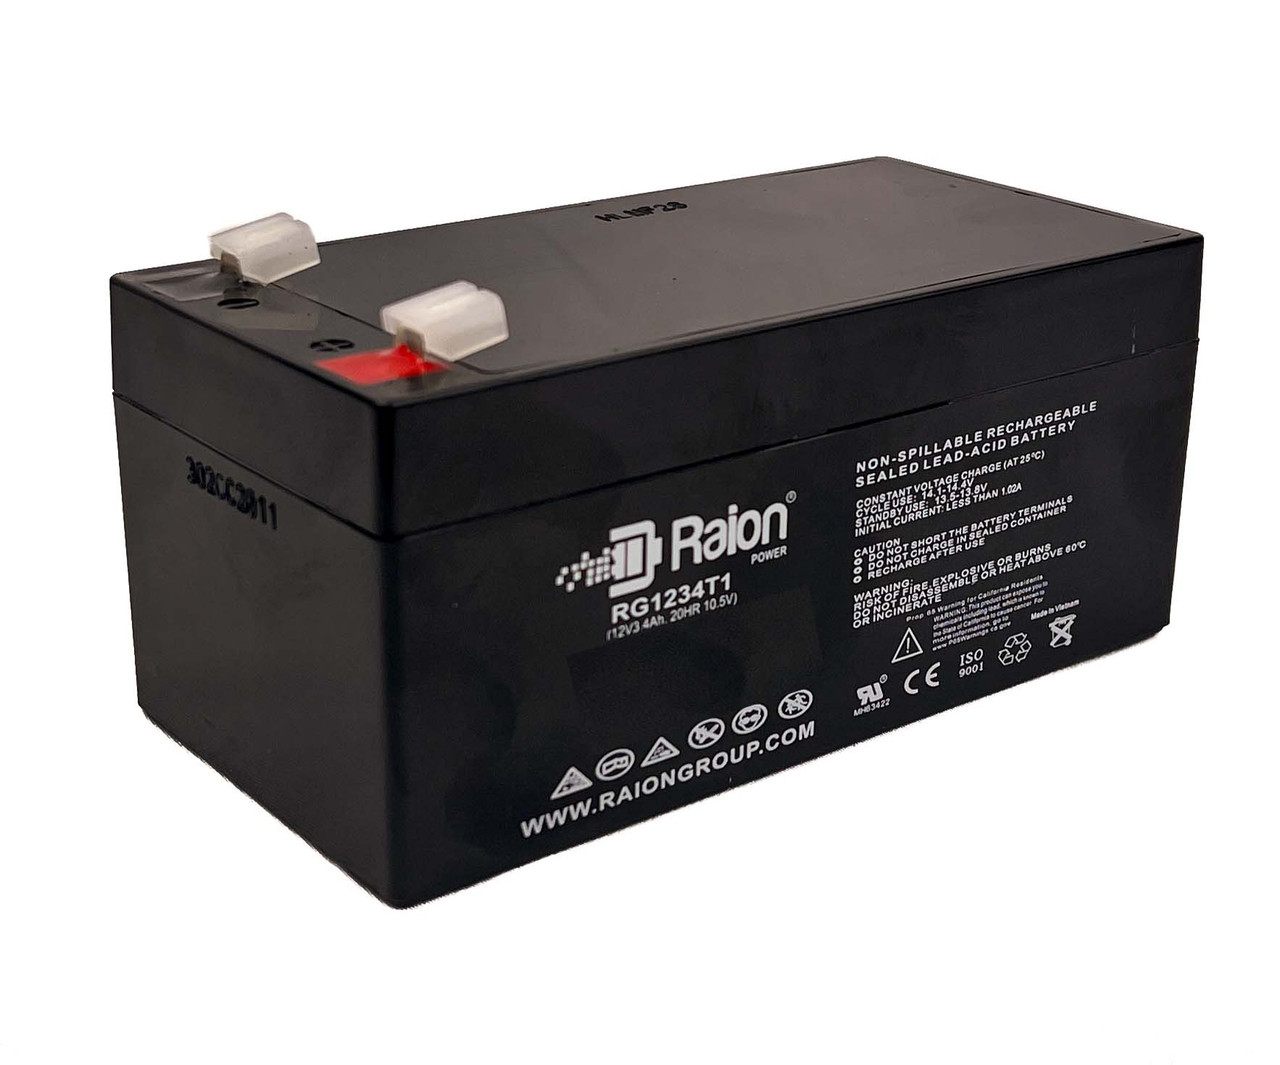 Raion Power 12V 3.4Ah Non-Spillable Replacement Battery for Duracell DURA12-3.3F2